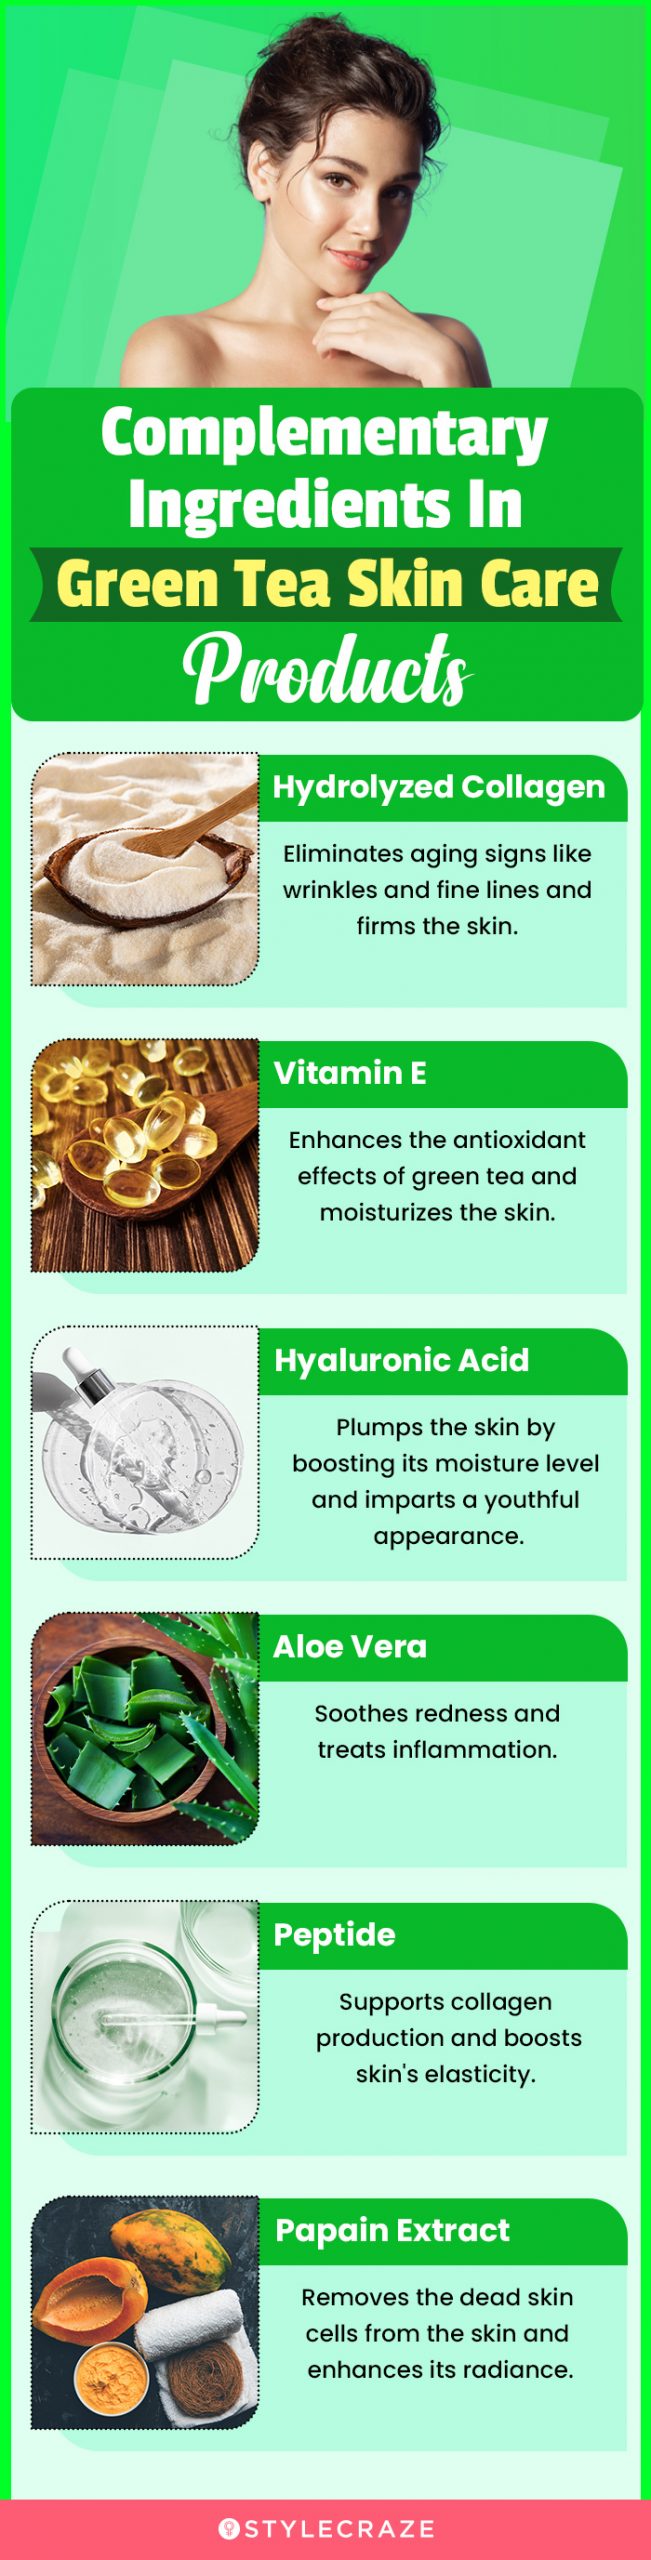 Complementary Ingredients In Green Tea Skin Care Products (infographic)